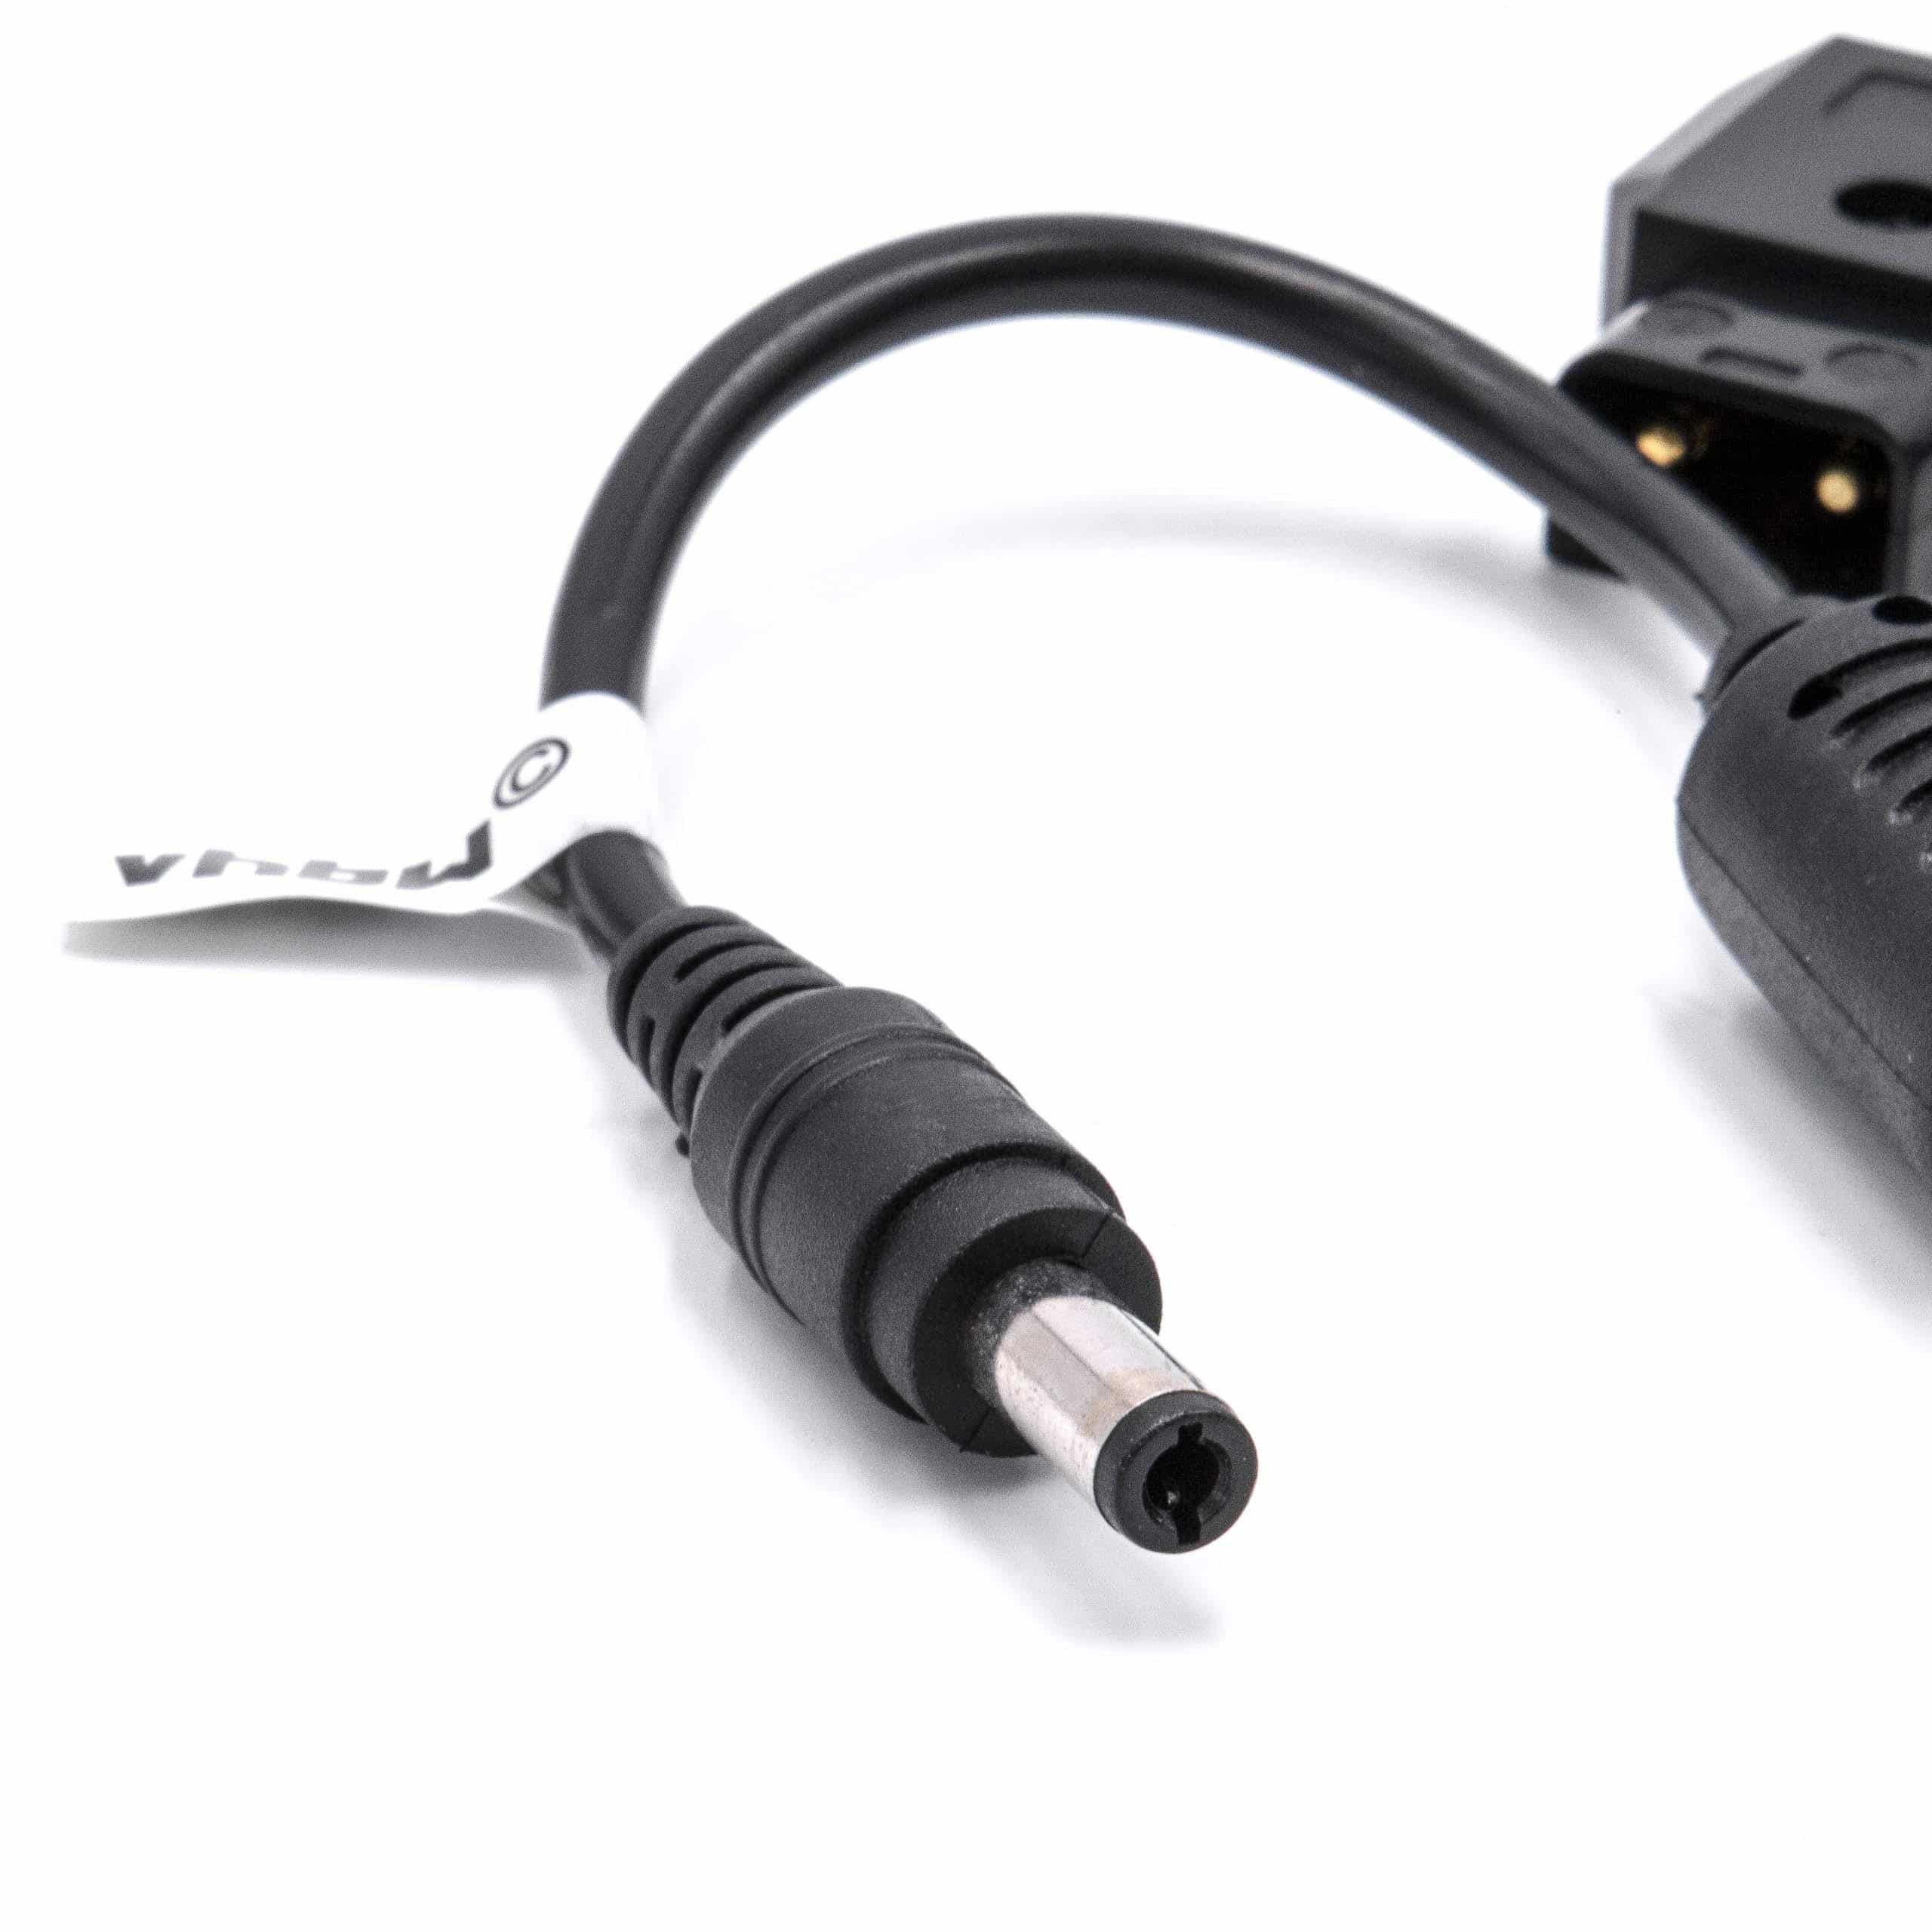 Adapter Cable D-Tap (male) to LED Power Supply suitable for Anton Bauer Dionic, D-Tap Camera - 1 m Black